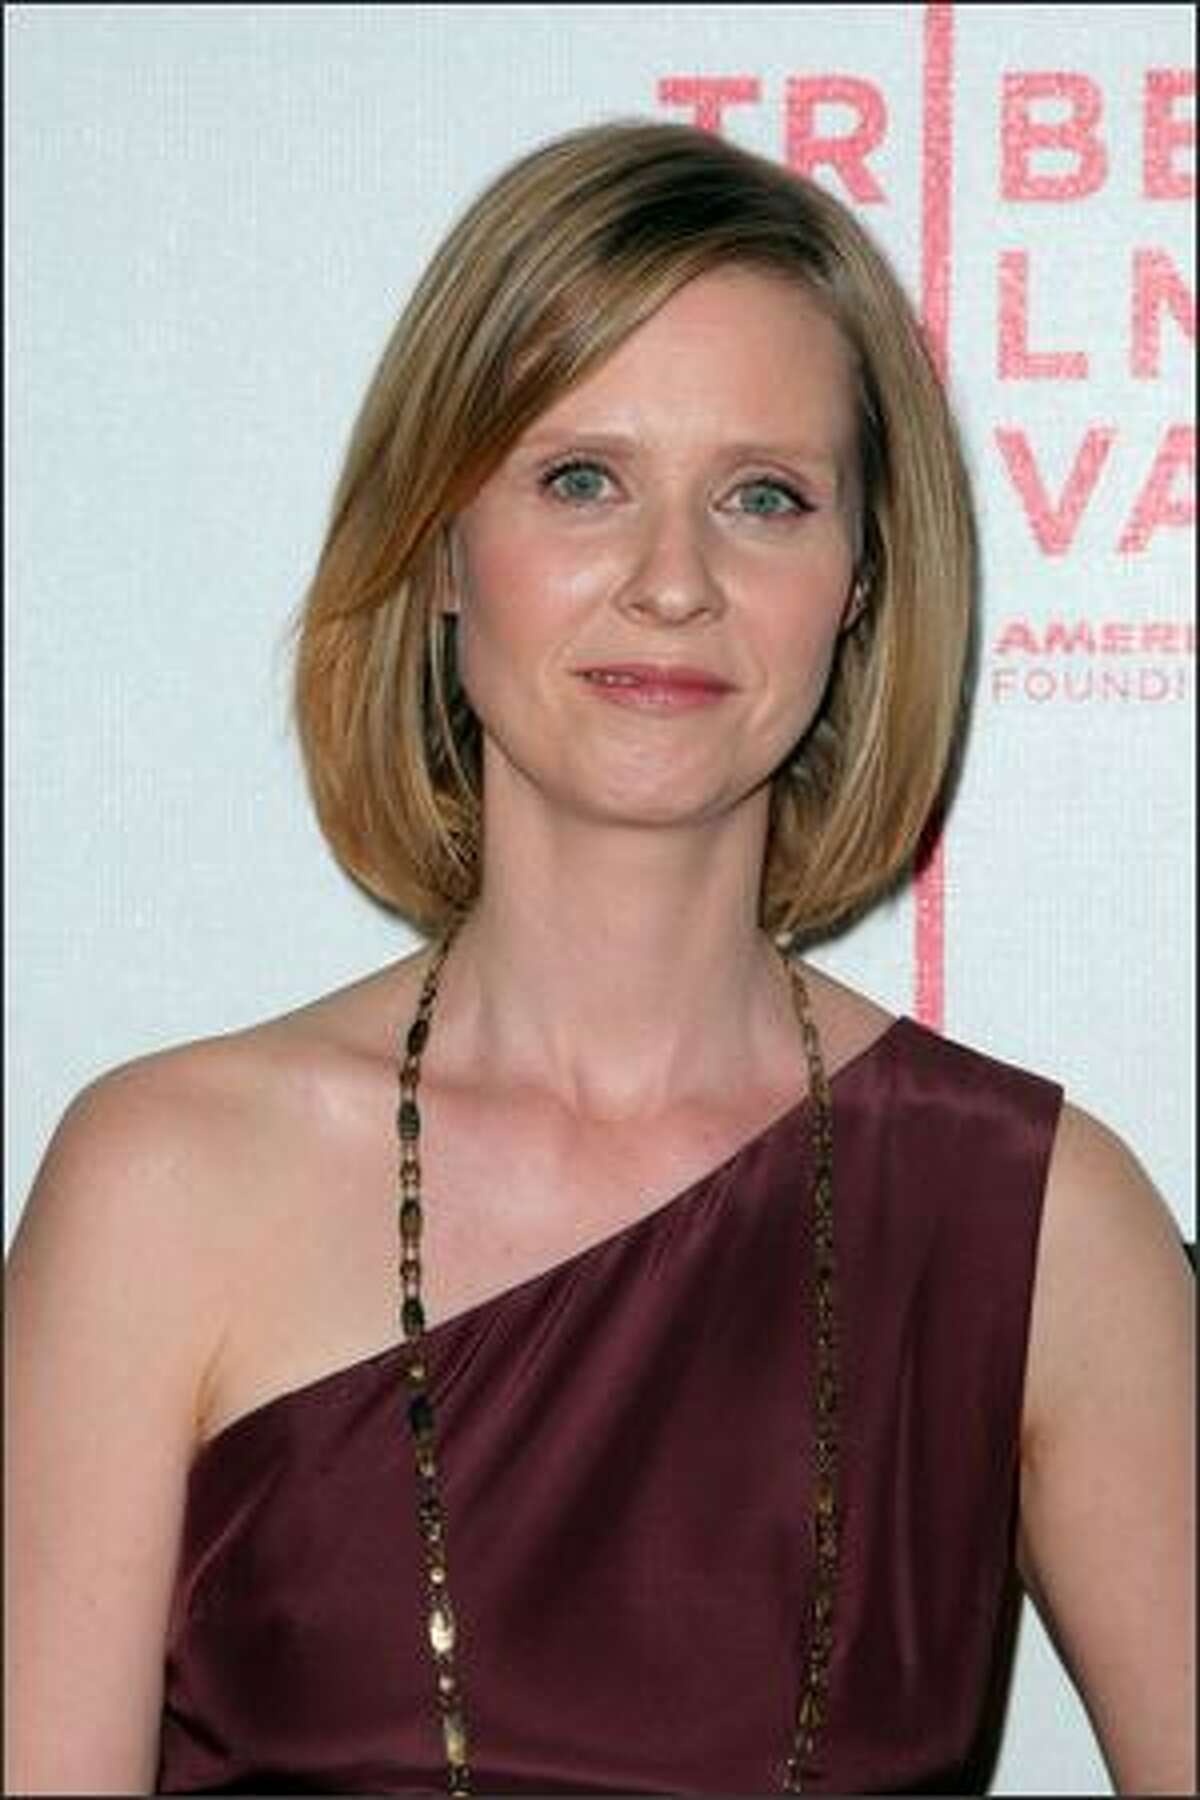 Cynthia Nixon attends the premiere of "An Englishman in New York"...